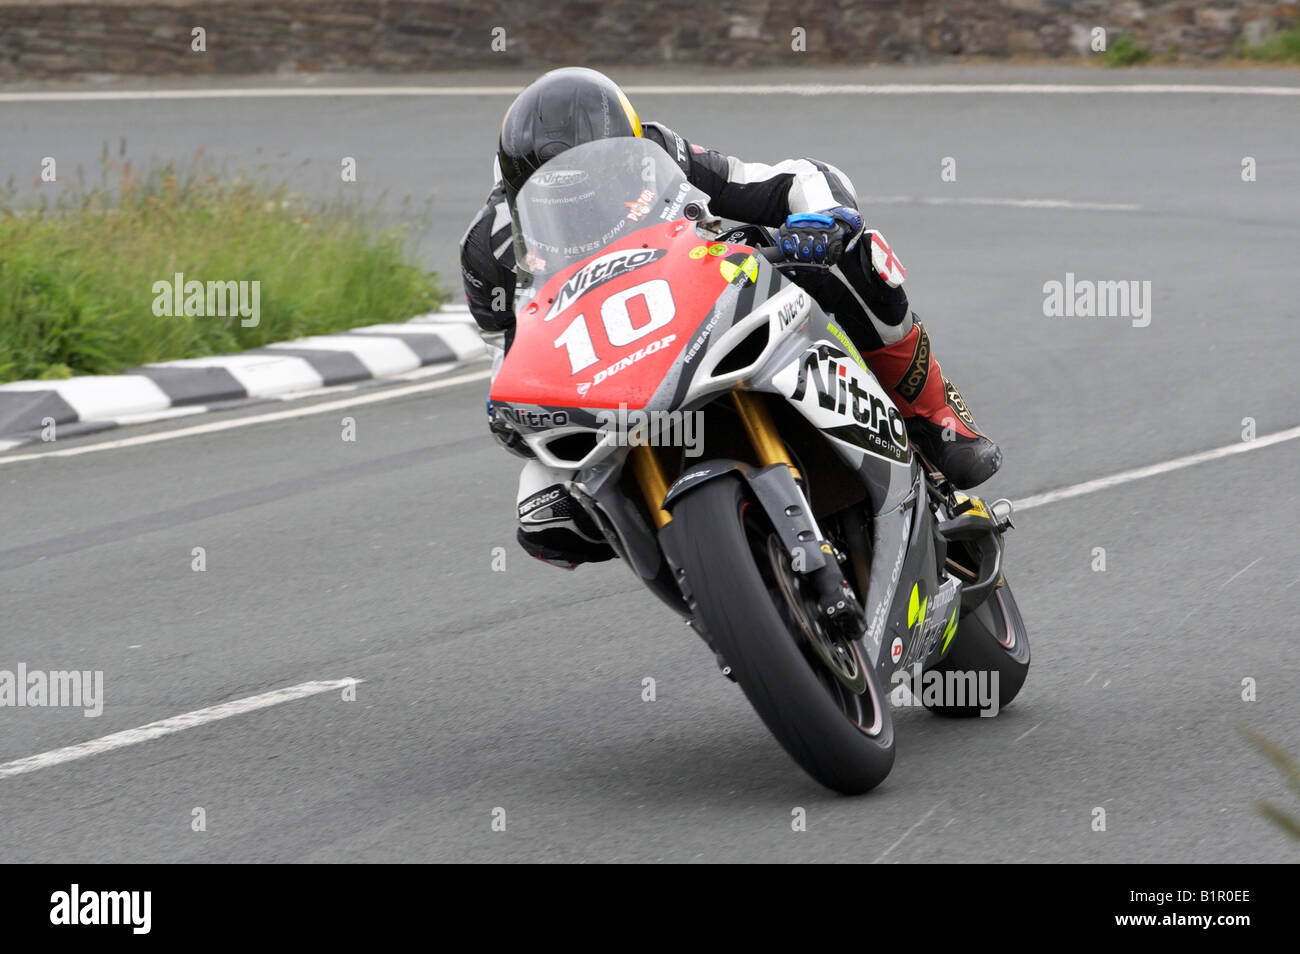 Steve Plater exits the Gooseneck during the 2008 Isle of Man Superstock TT on his Nitro-Phase One Endurance Team Yamaha R1. Stock Photo